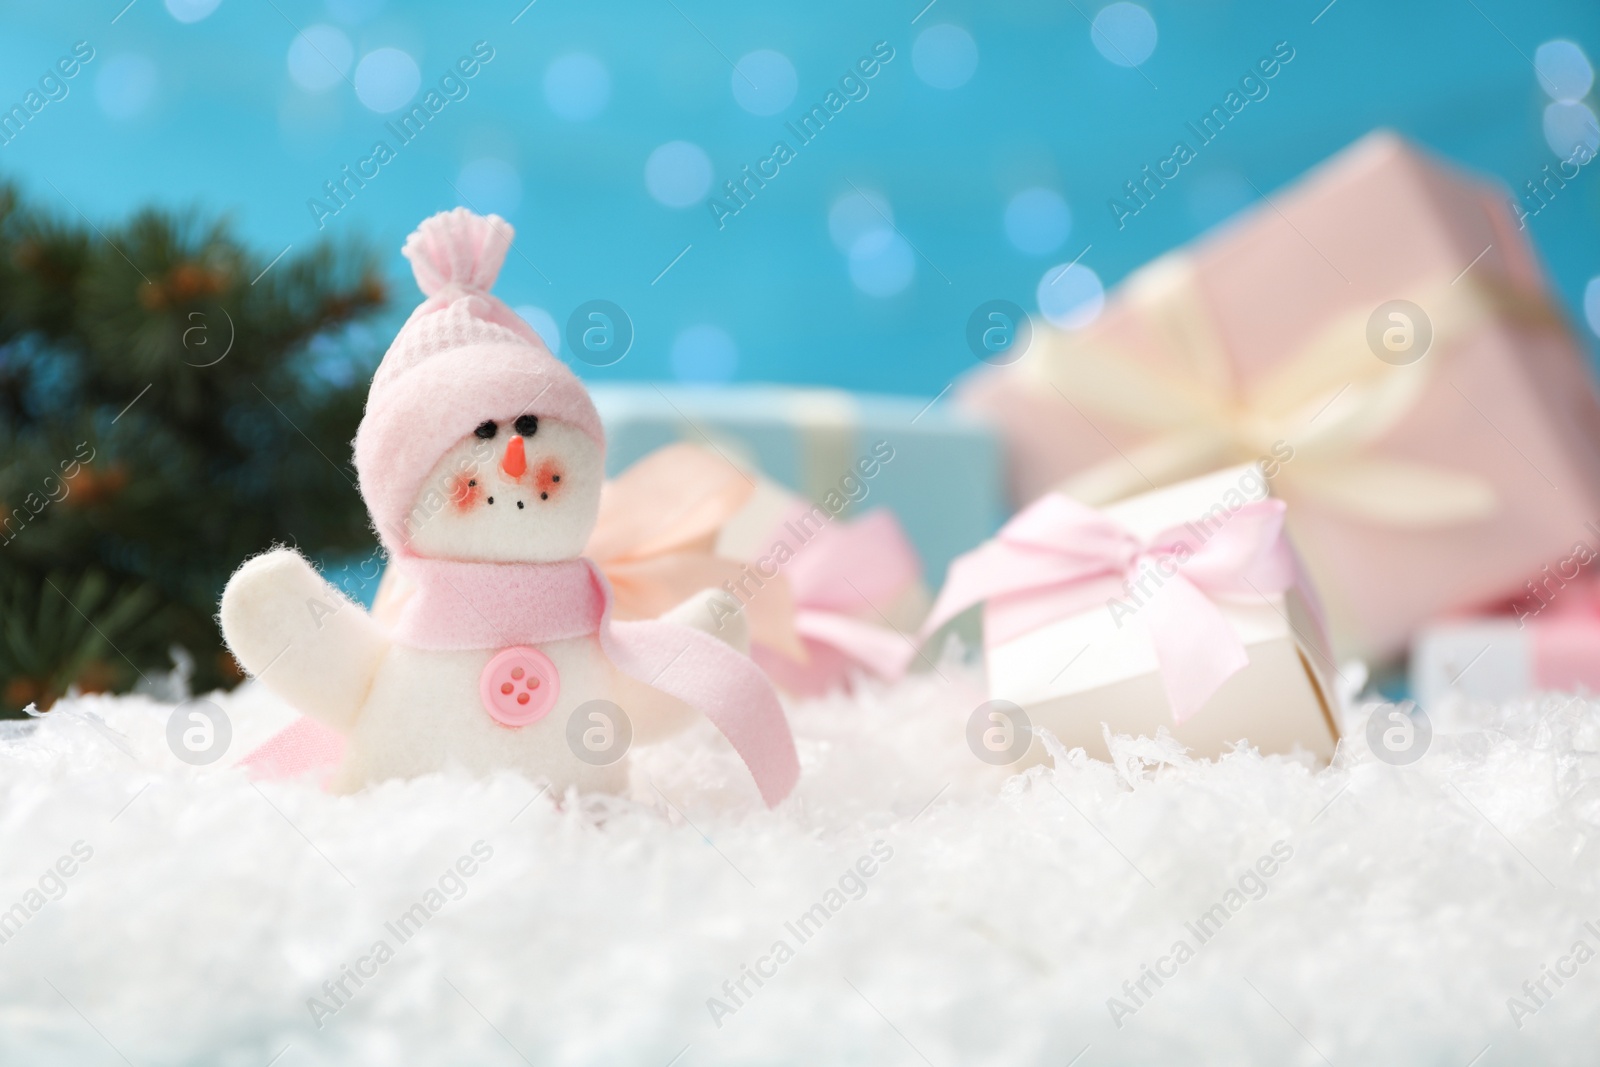 Photo of Cute toy snowman and gift box on snow against blurred background